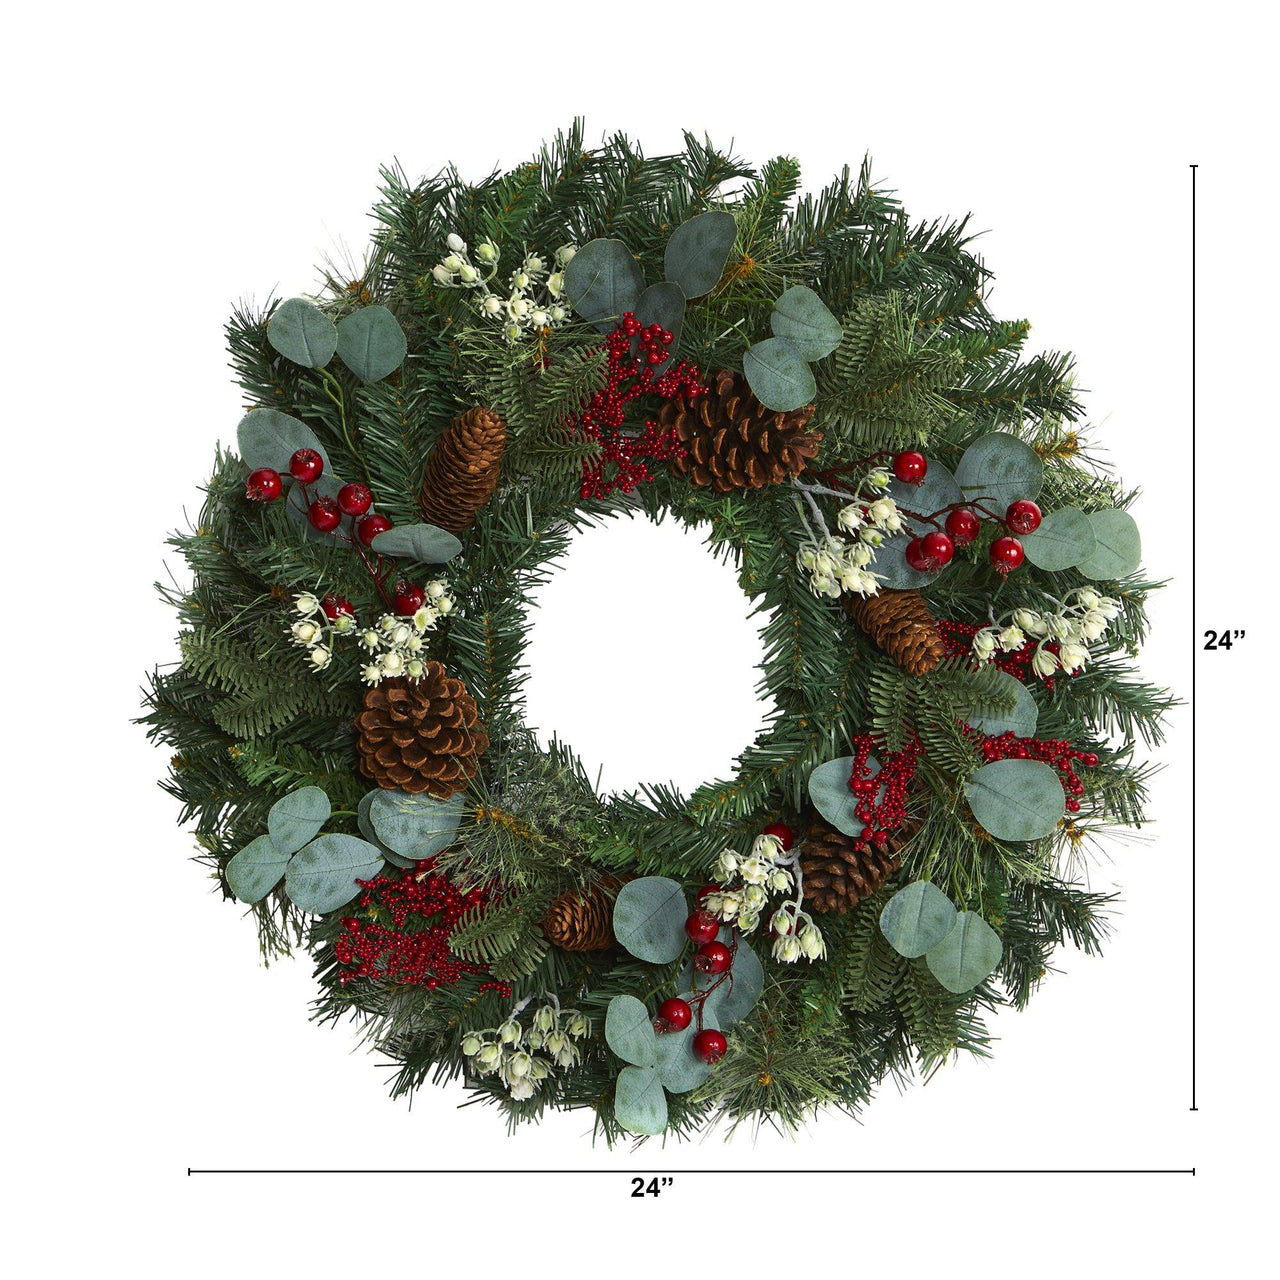 24” Eucalyptus and Pine Artificial Wreath with Berries and Pine Cones - The Fox Decor